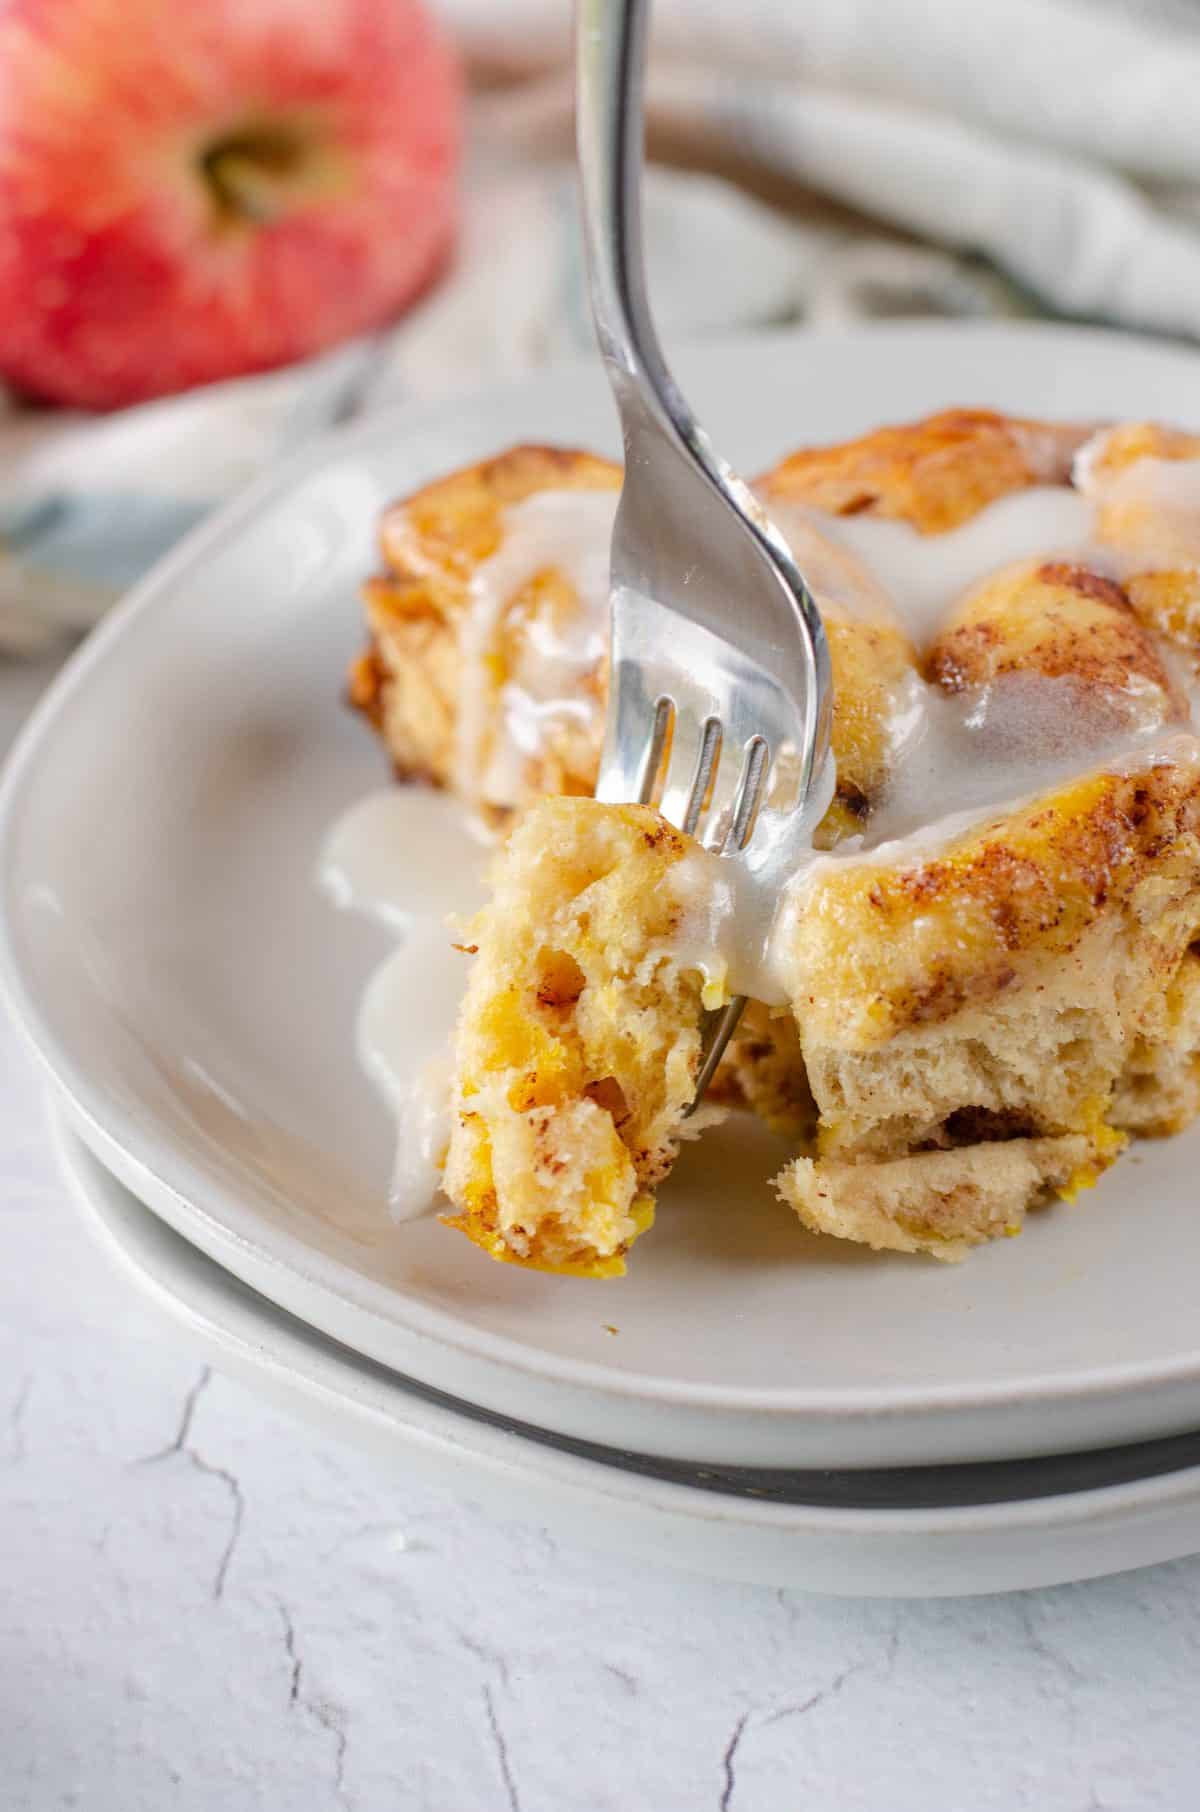 A forkful of cinnamon roll on a plate with icing dripping down the sides.